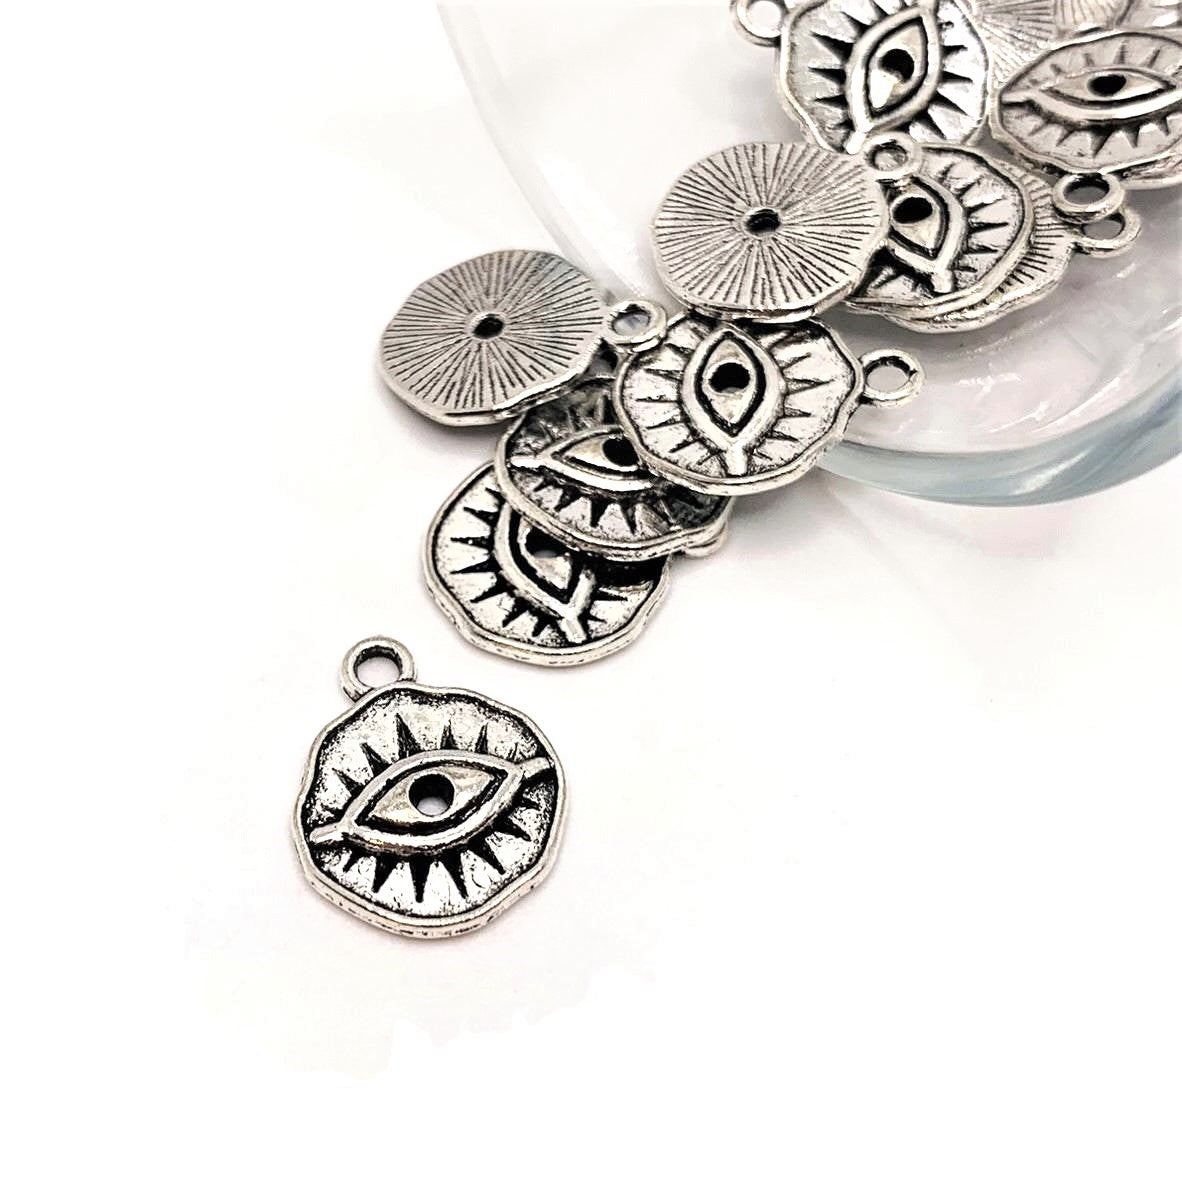 4, 20 or 50 Pieces: Silver Small Evil Eye Charms